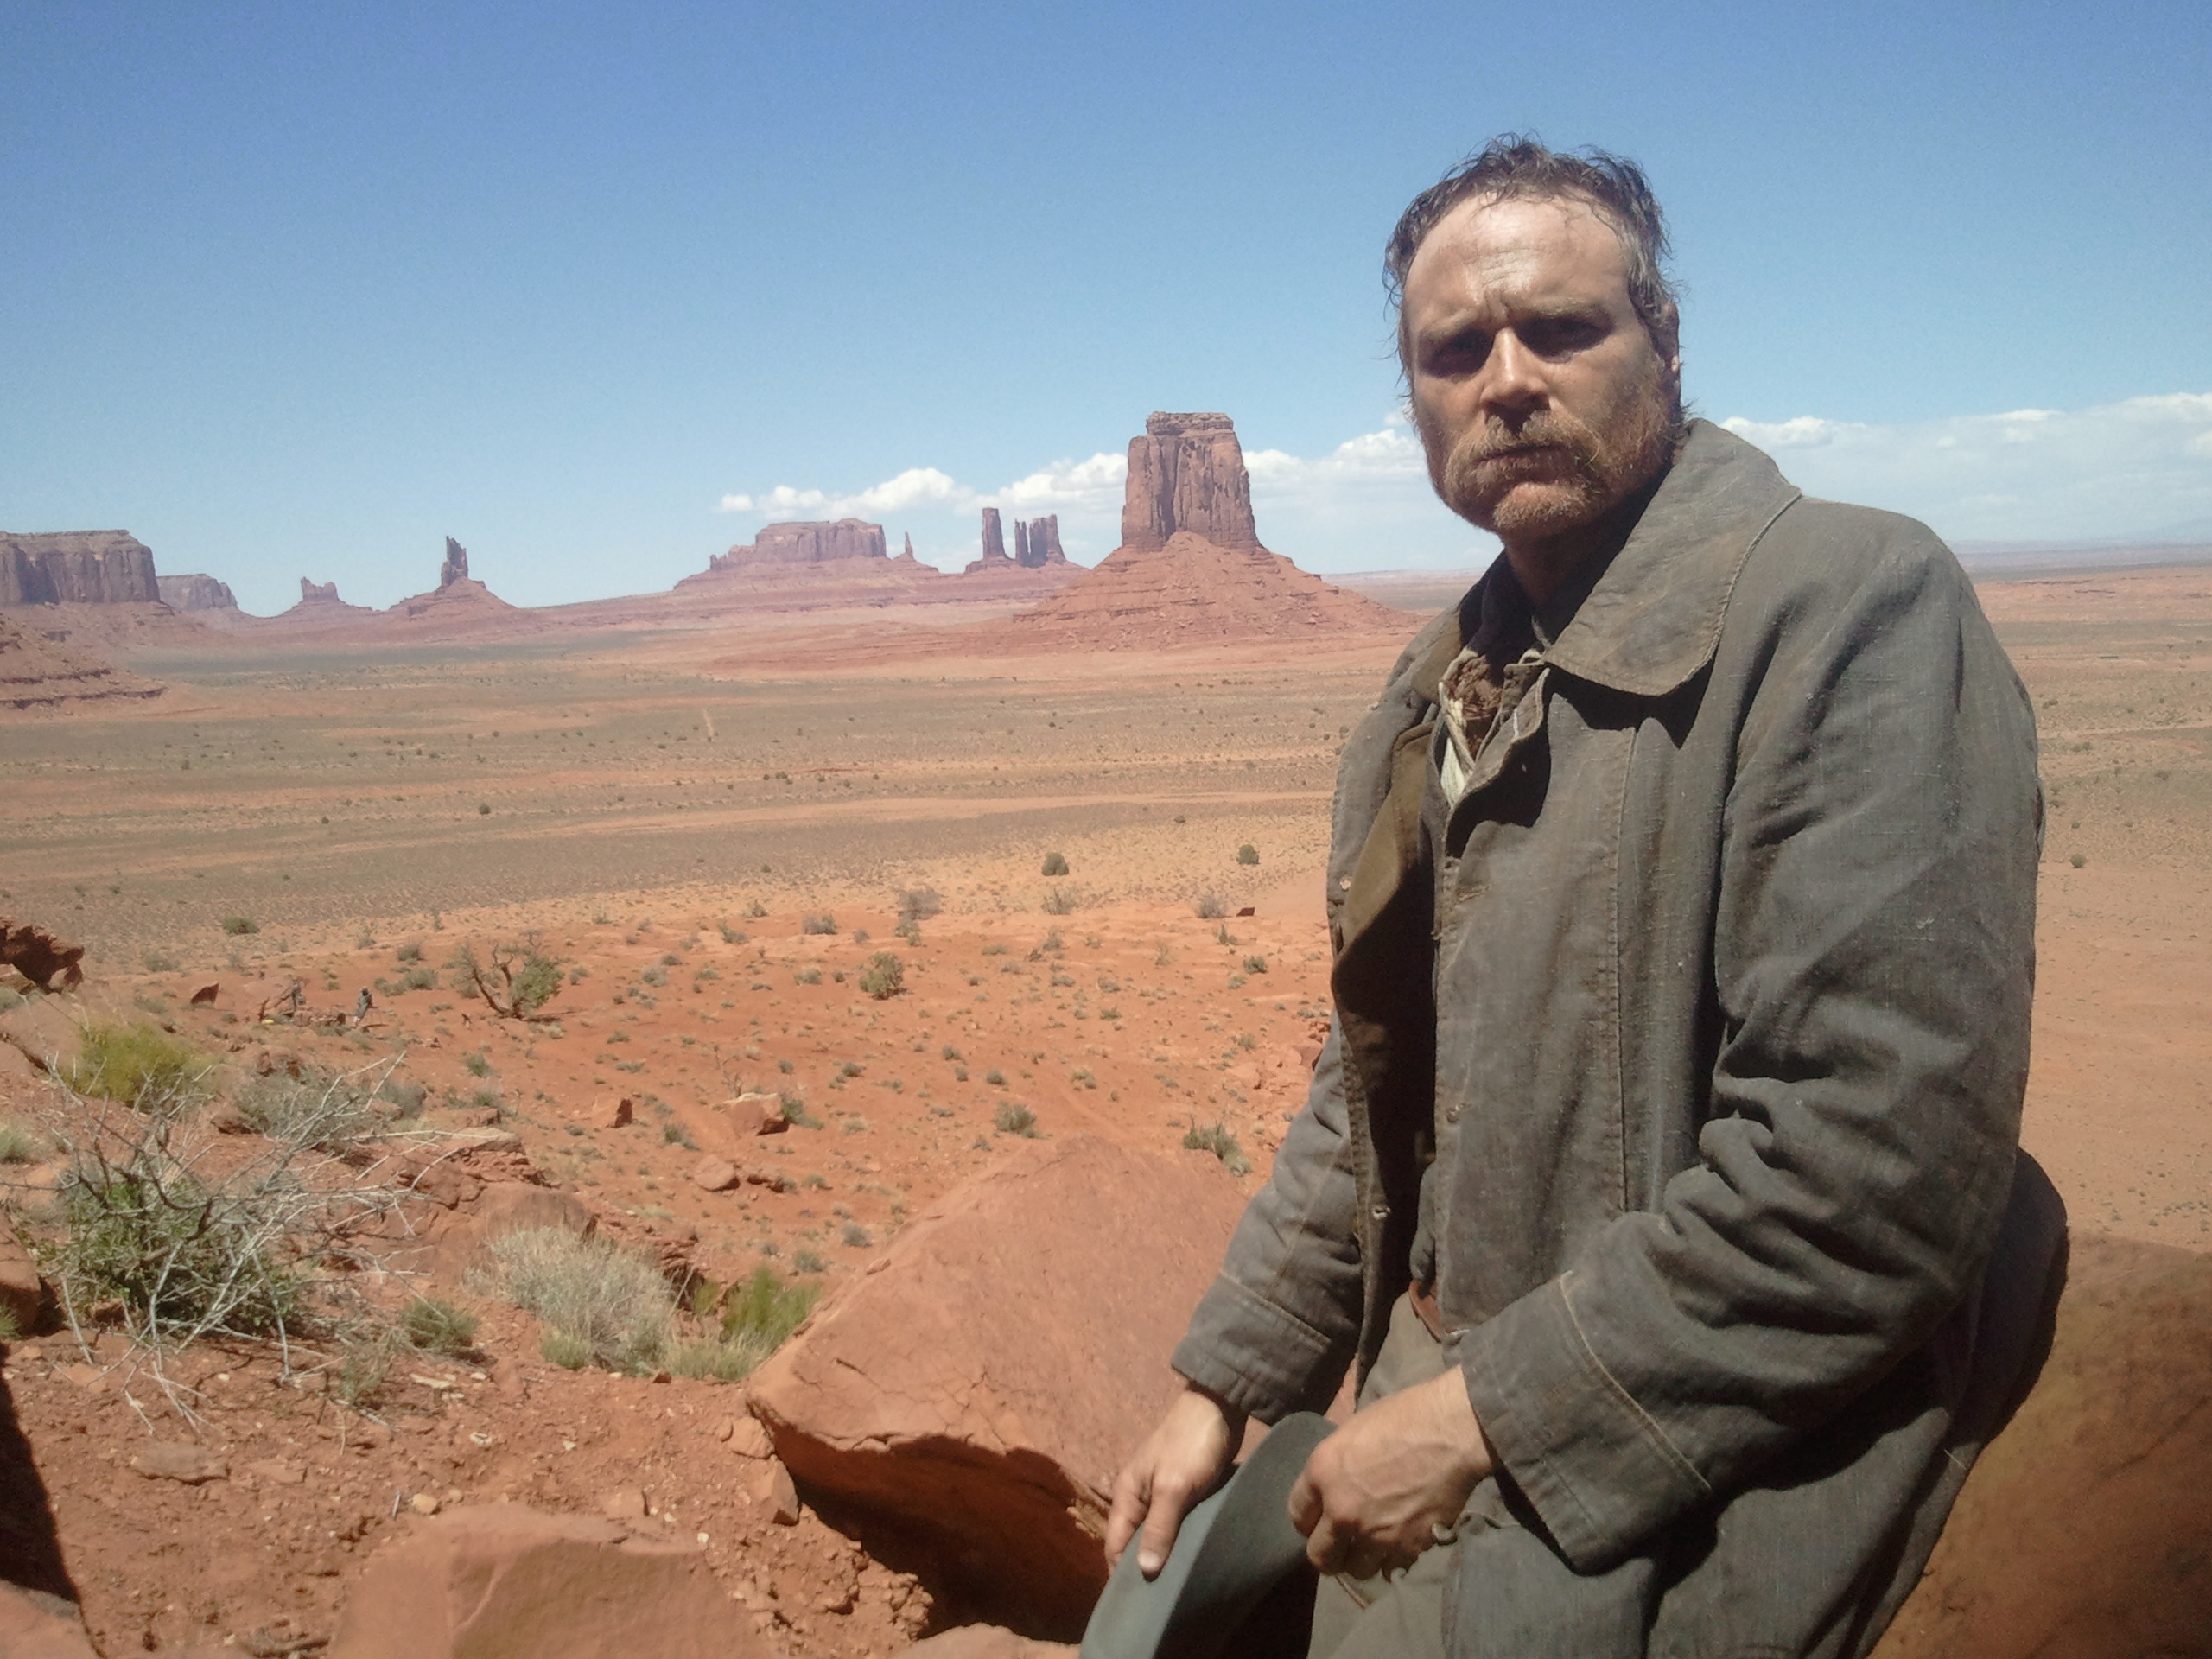 Damon Carney in Monument Valley on the set of The Lone Ranger